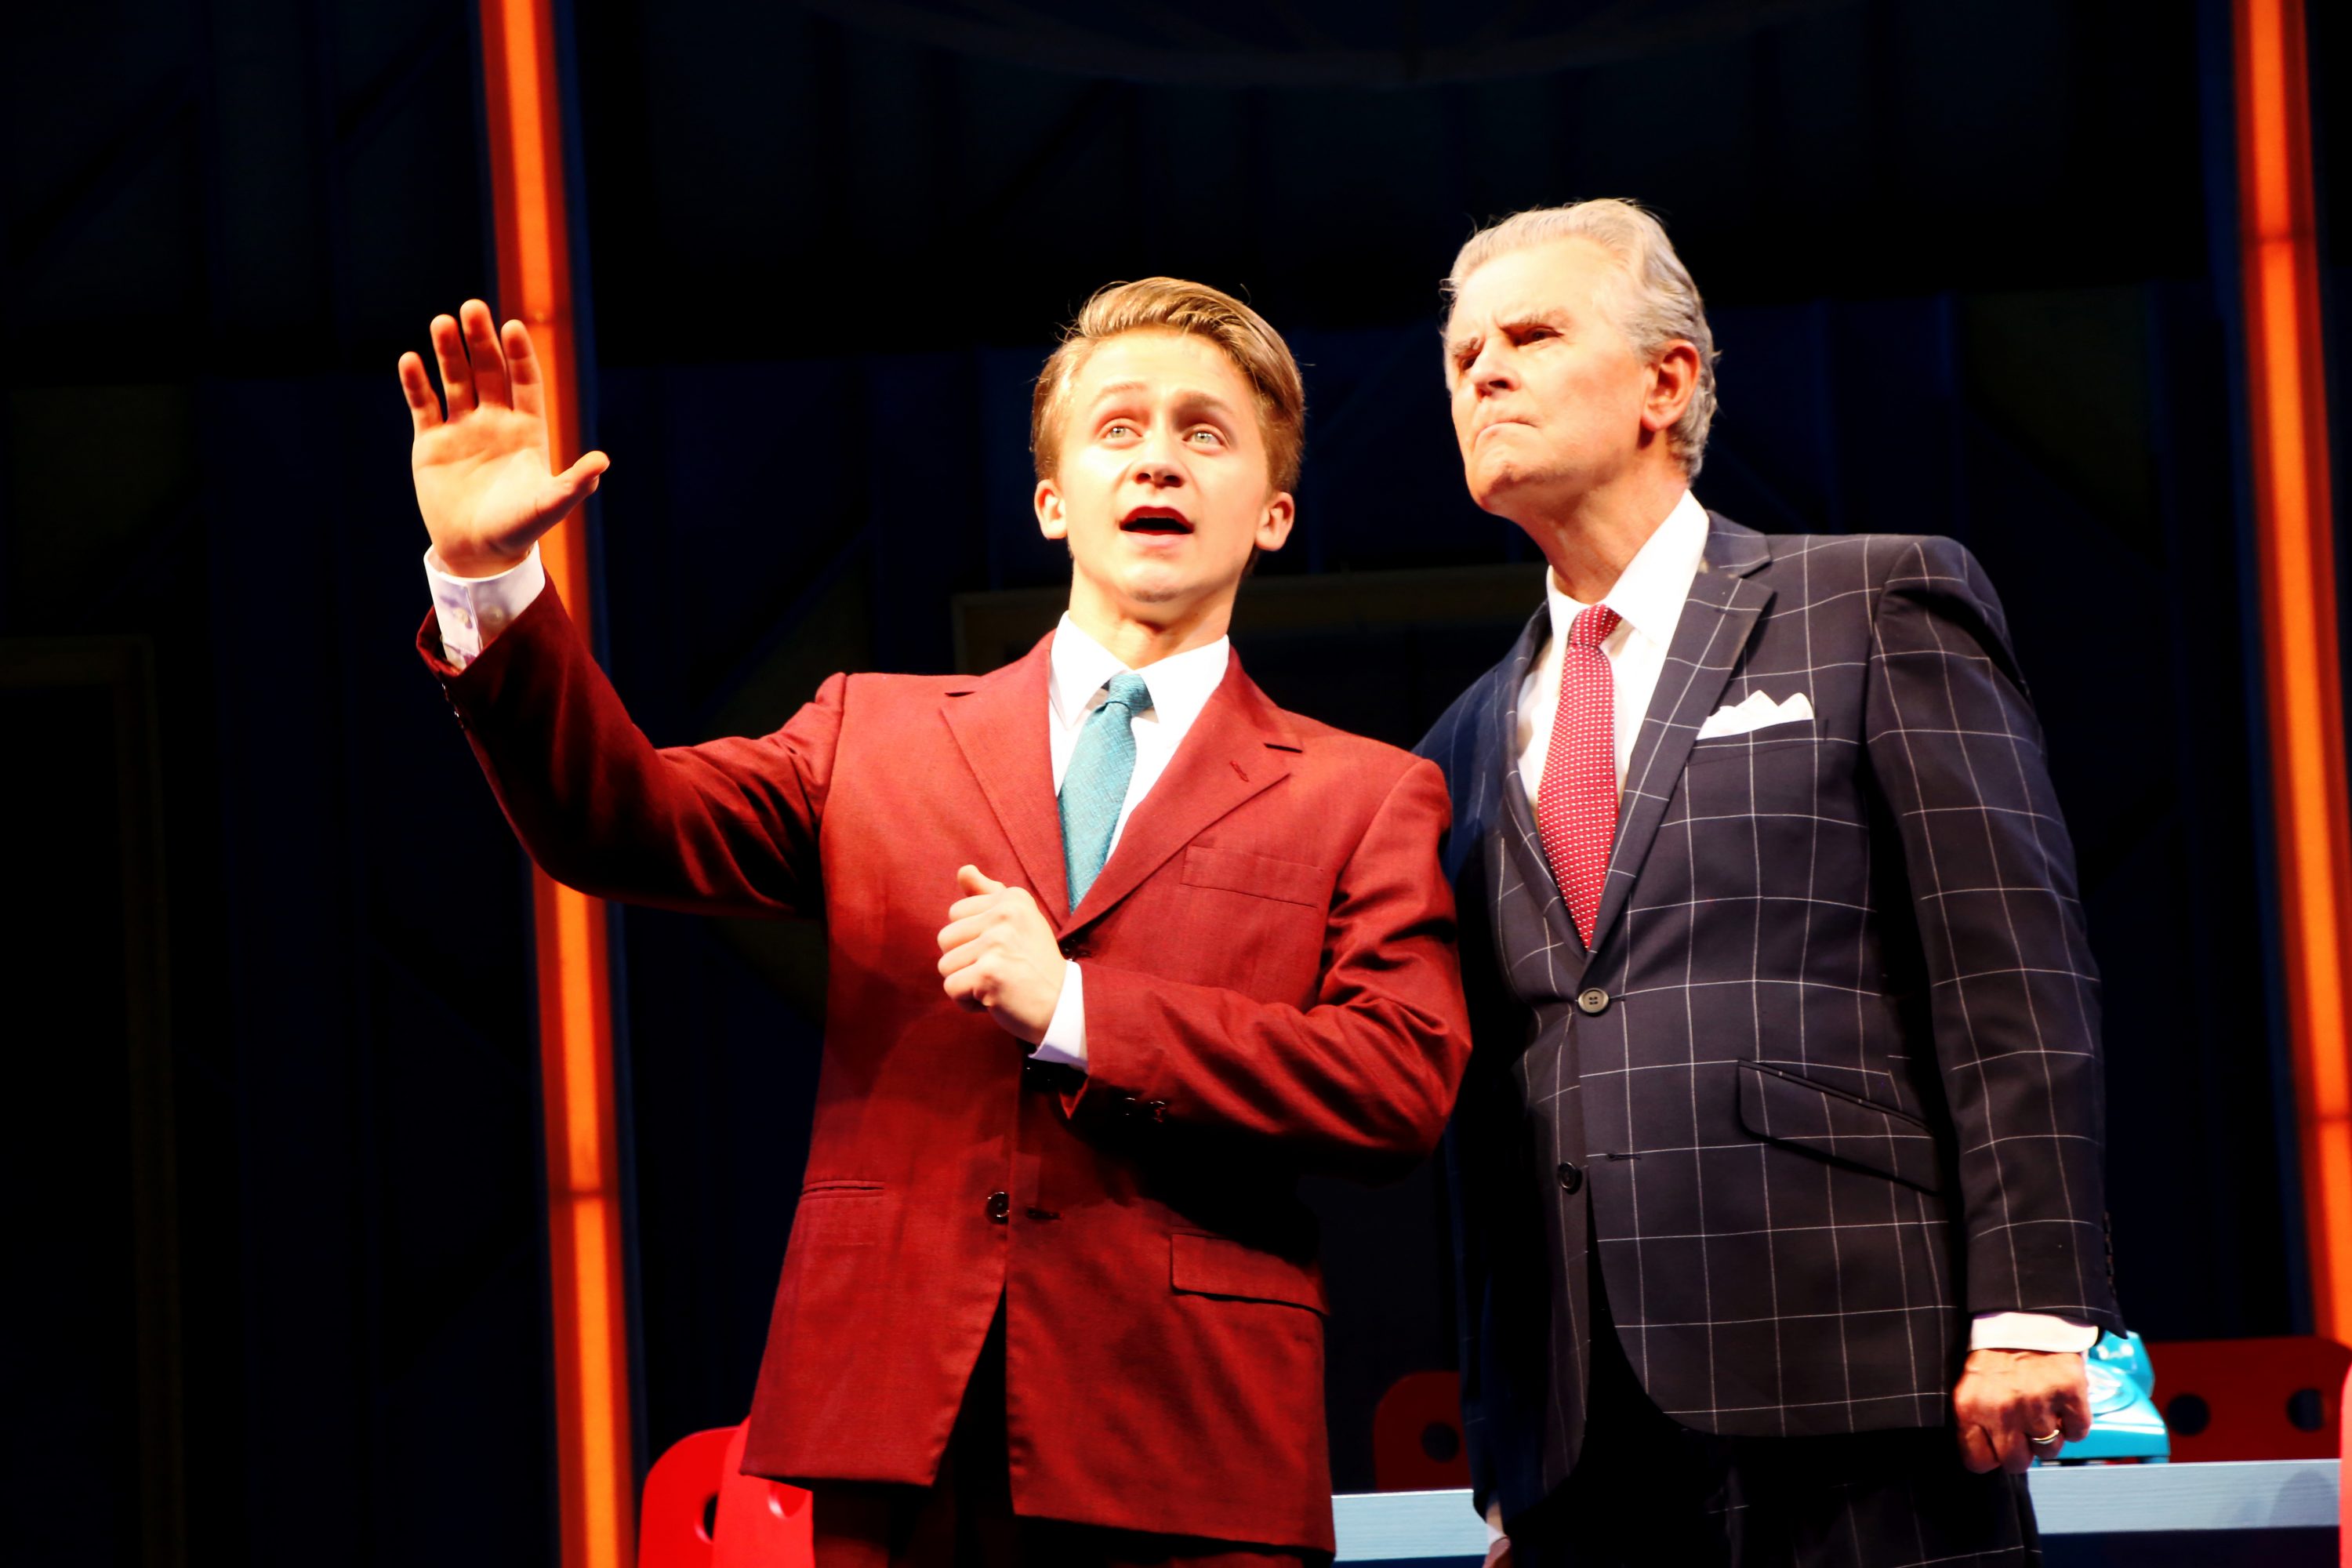 Riley Costello (Finch), left, and Fred Grandy (Biggley) in 'How to Succeed in Business Without Really Trying,' onstage June 2-12, 2016 at Connecticut Repertory Theatre’s Harriet S. Jorgensen Theatre. (Gerry Goodstein for UConn)